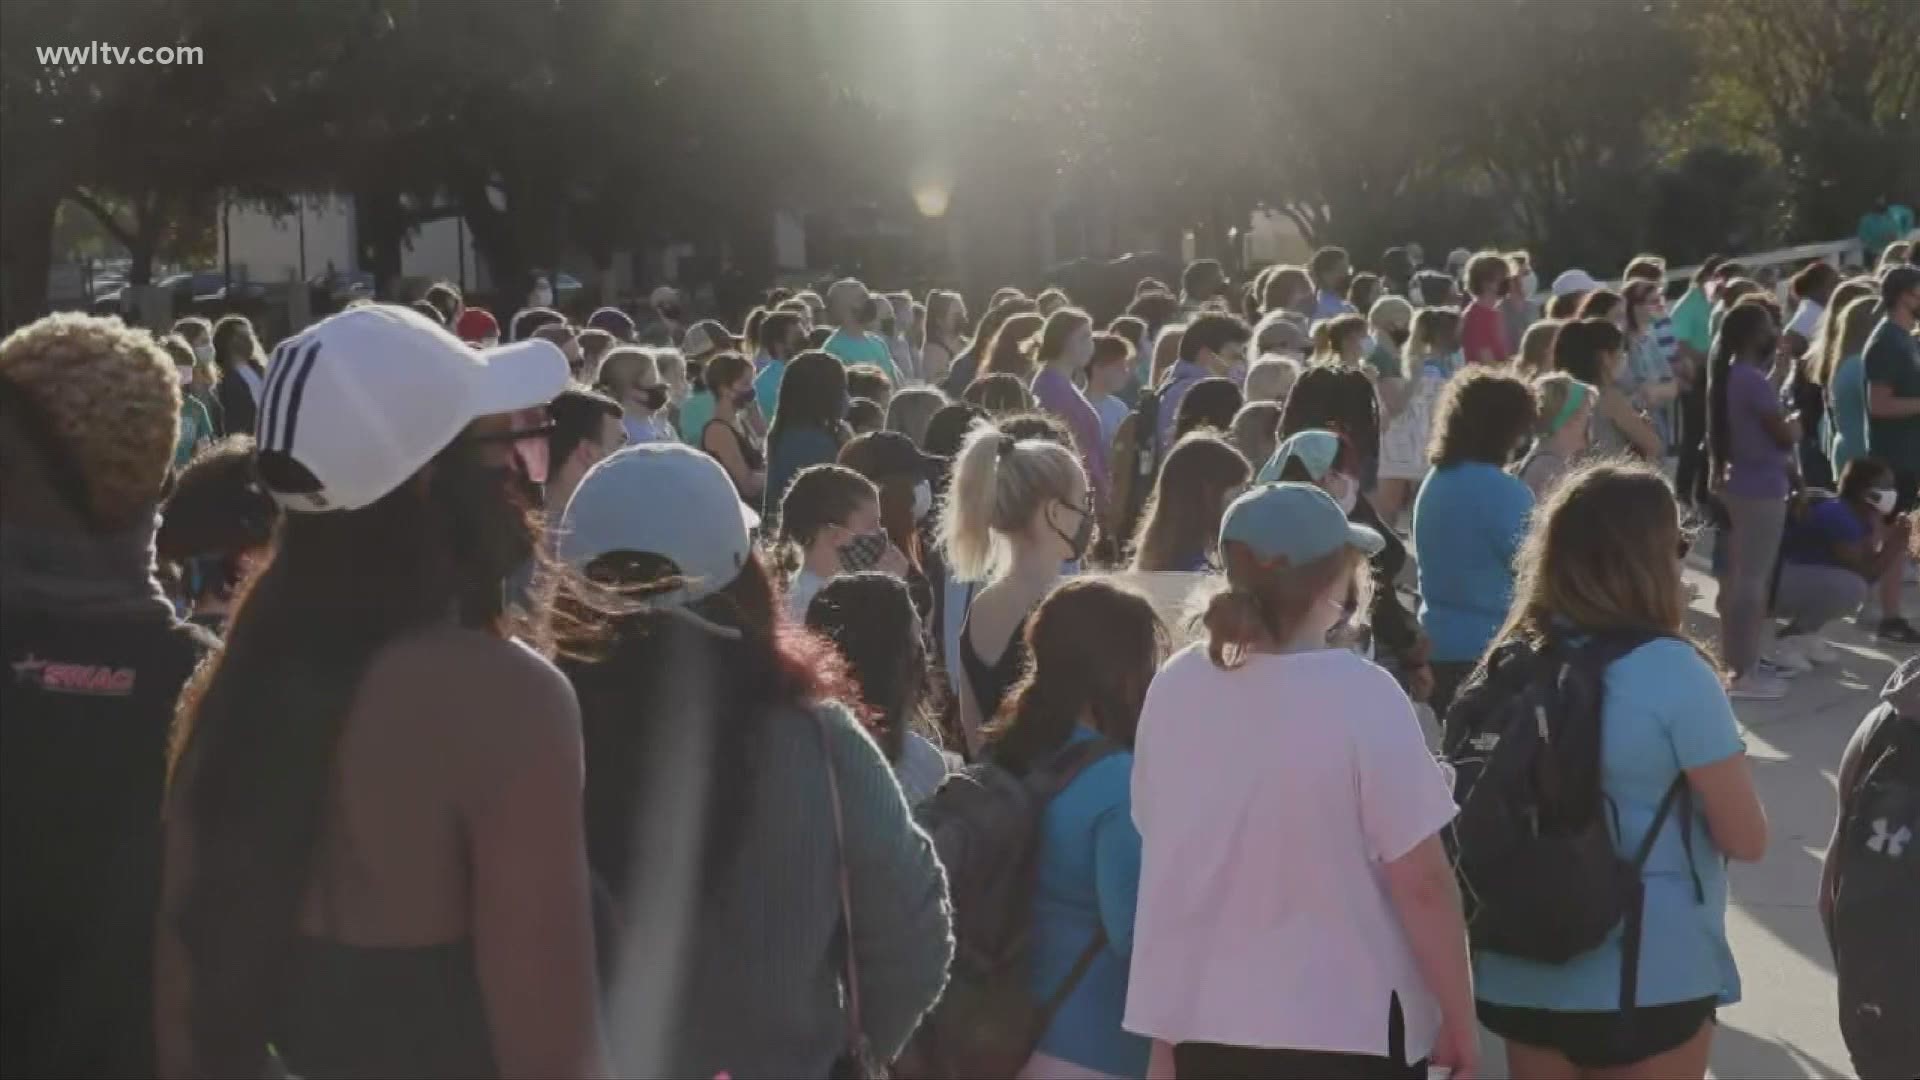 A few hundred students walked across campus in protest after an article earlier this week said LSU didn't do enough to investigate accusations of sexual assault.